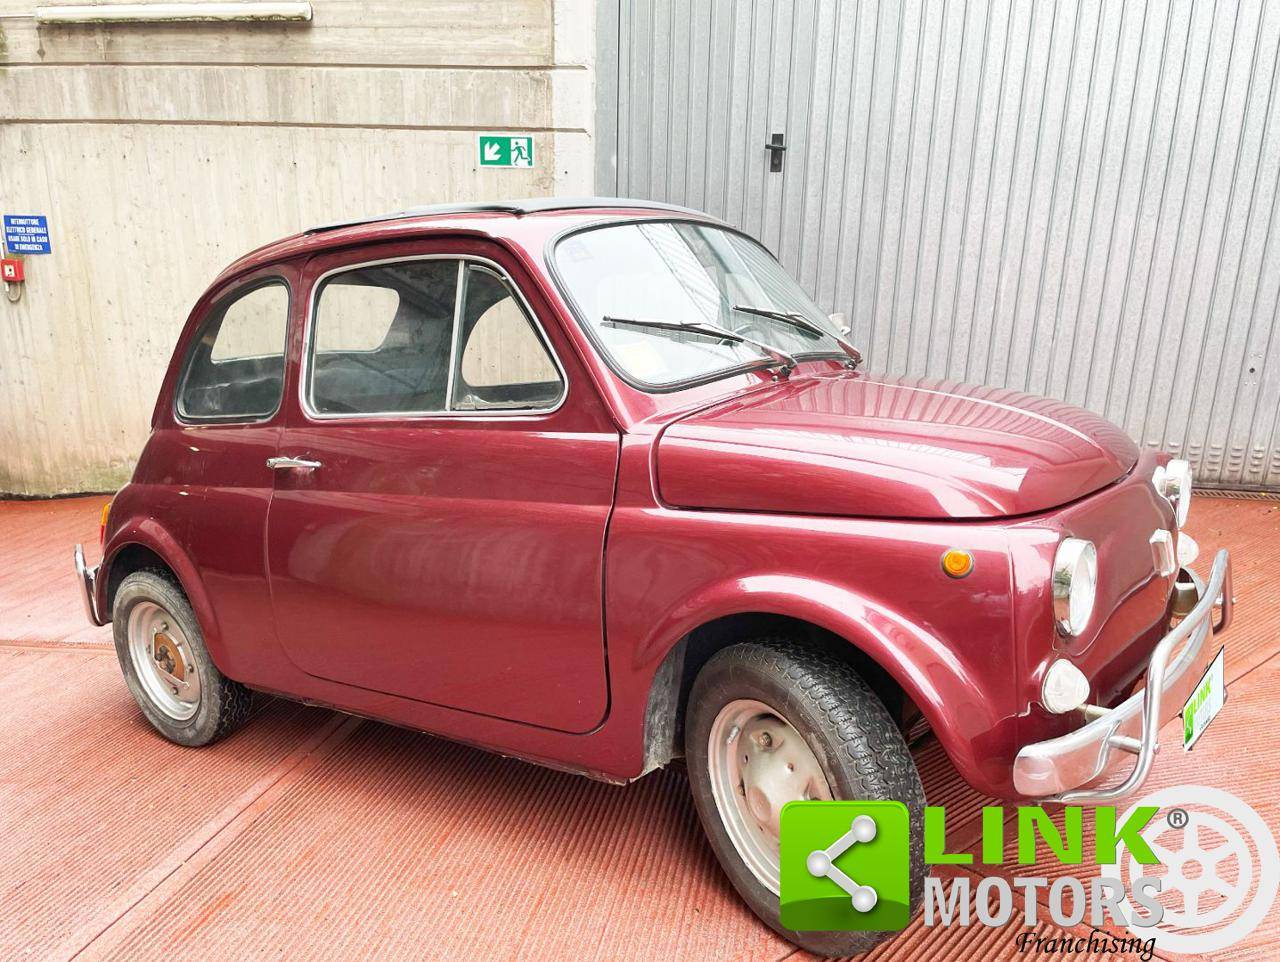 For Sale: FIAT 500 L (1969) offered for €5,700